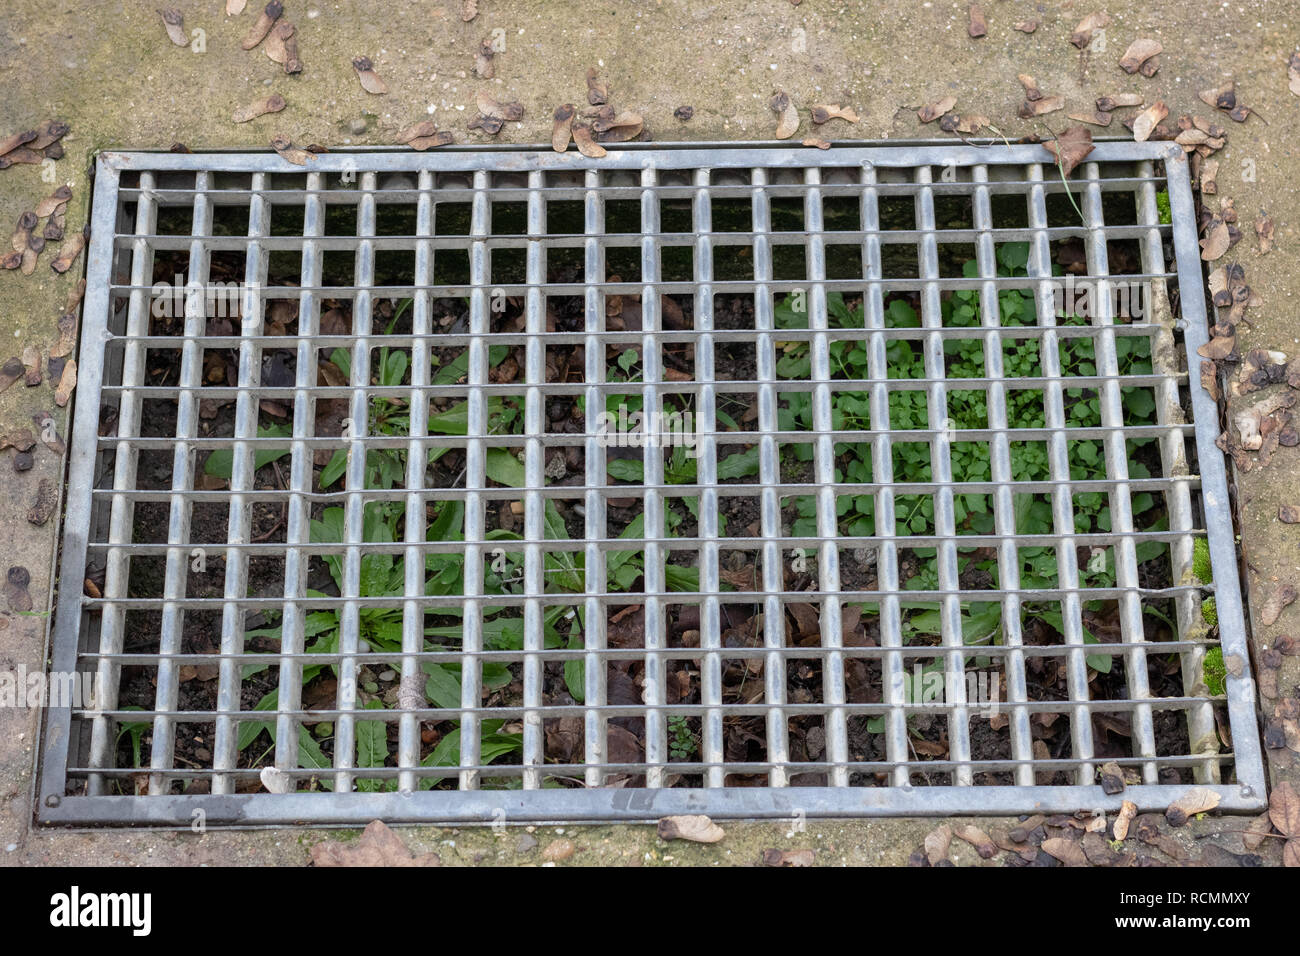 waterway and road - grass. iron grate of water drain in grass garden field. Steel rusty grating in the Grass garden and concrete. Manhole cover metal  Stock Photo